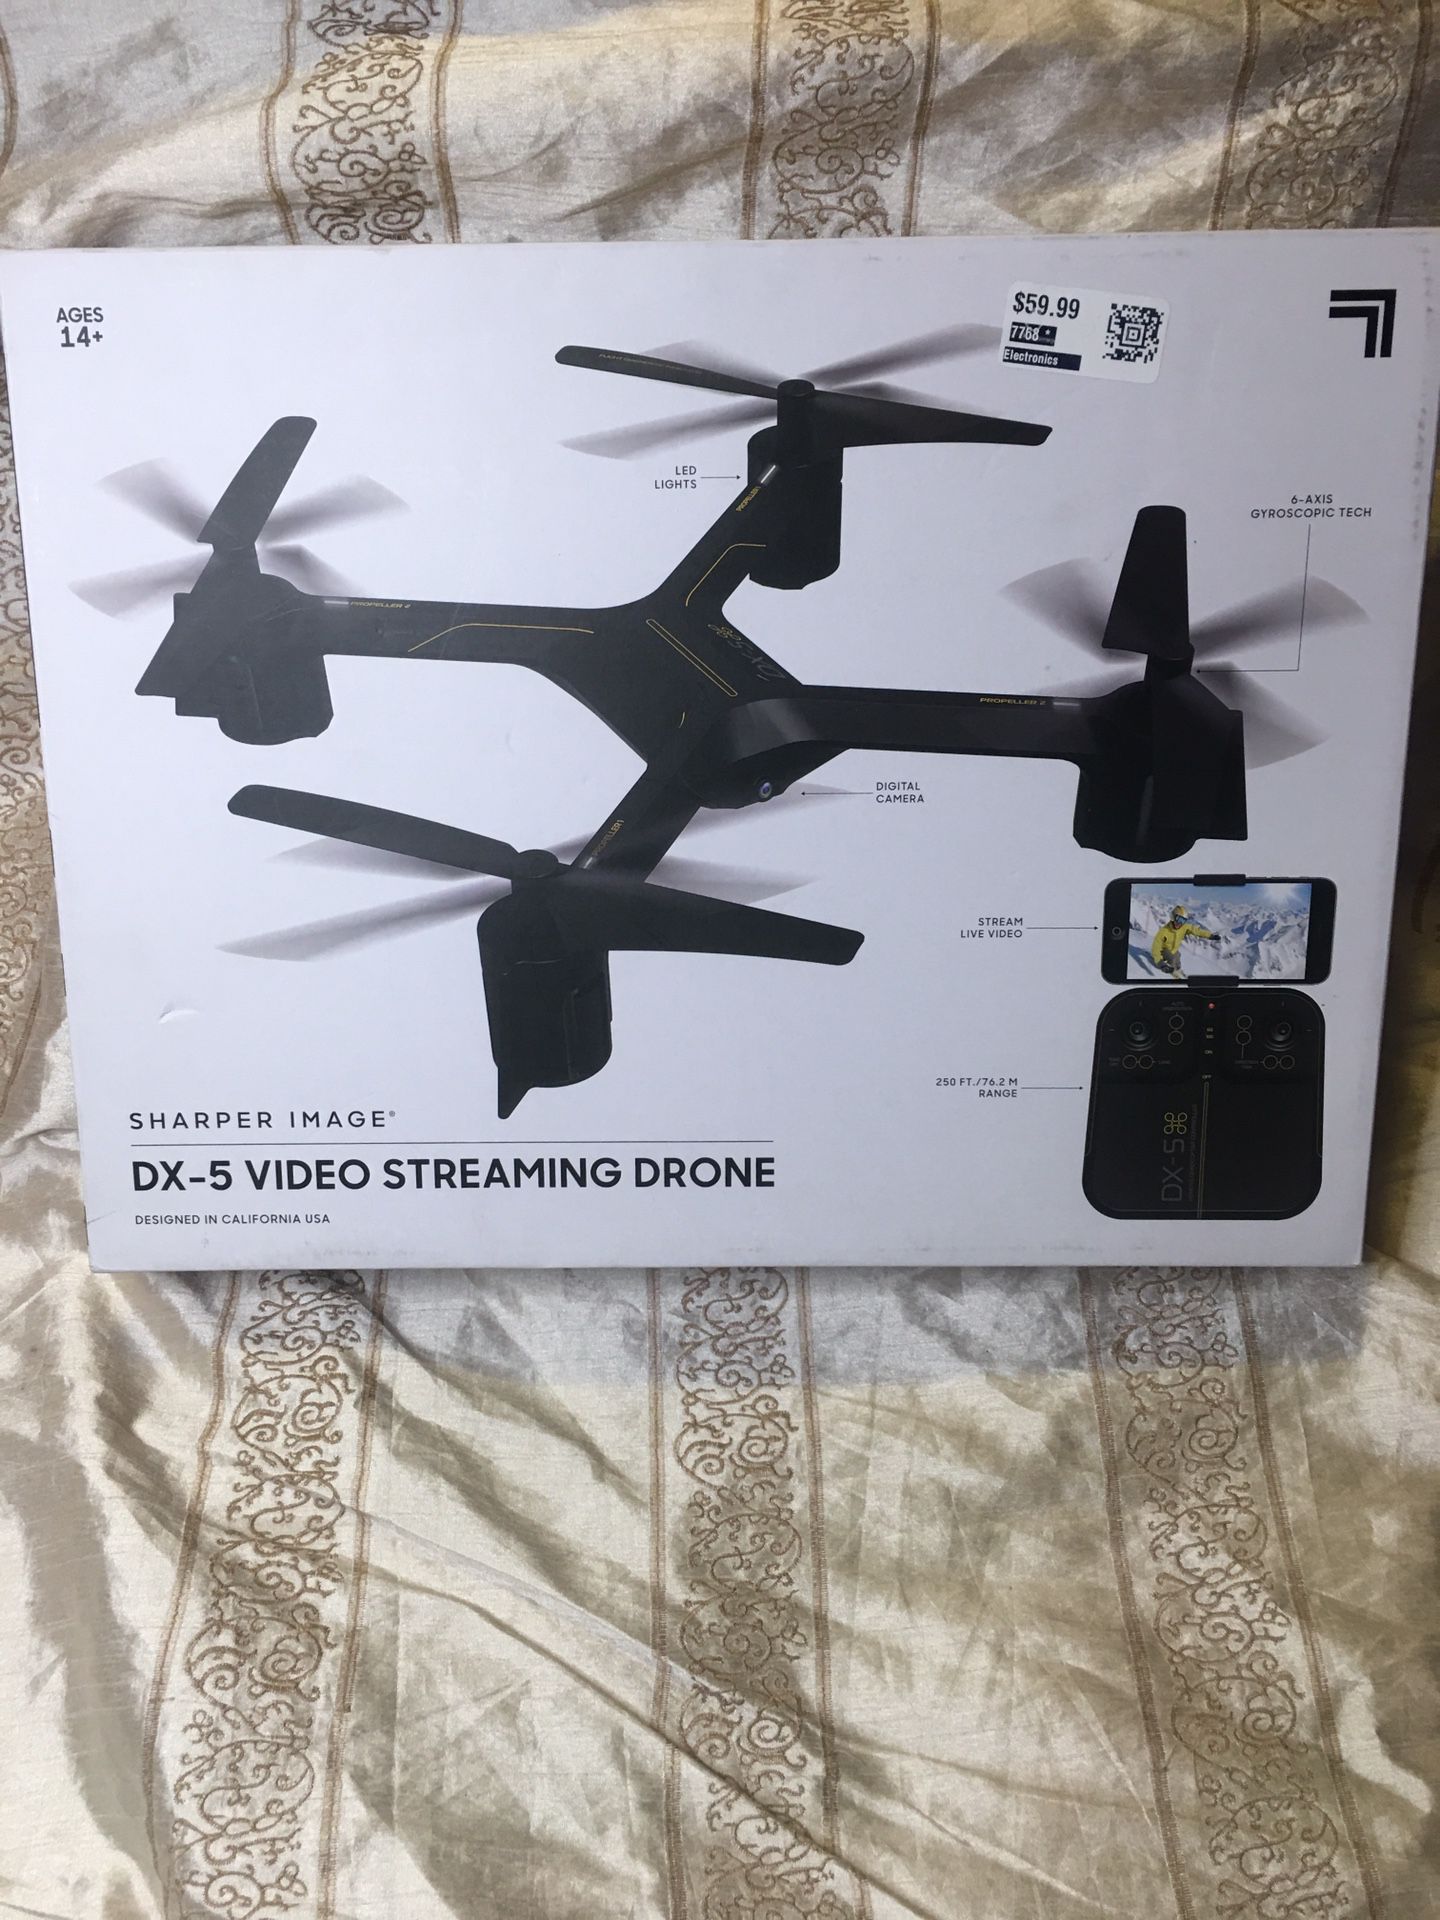 Video Streaming Drone Sharper Image